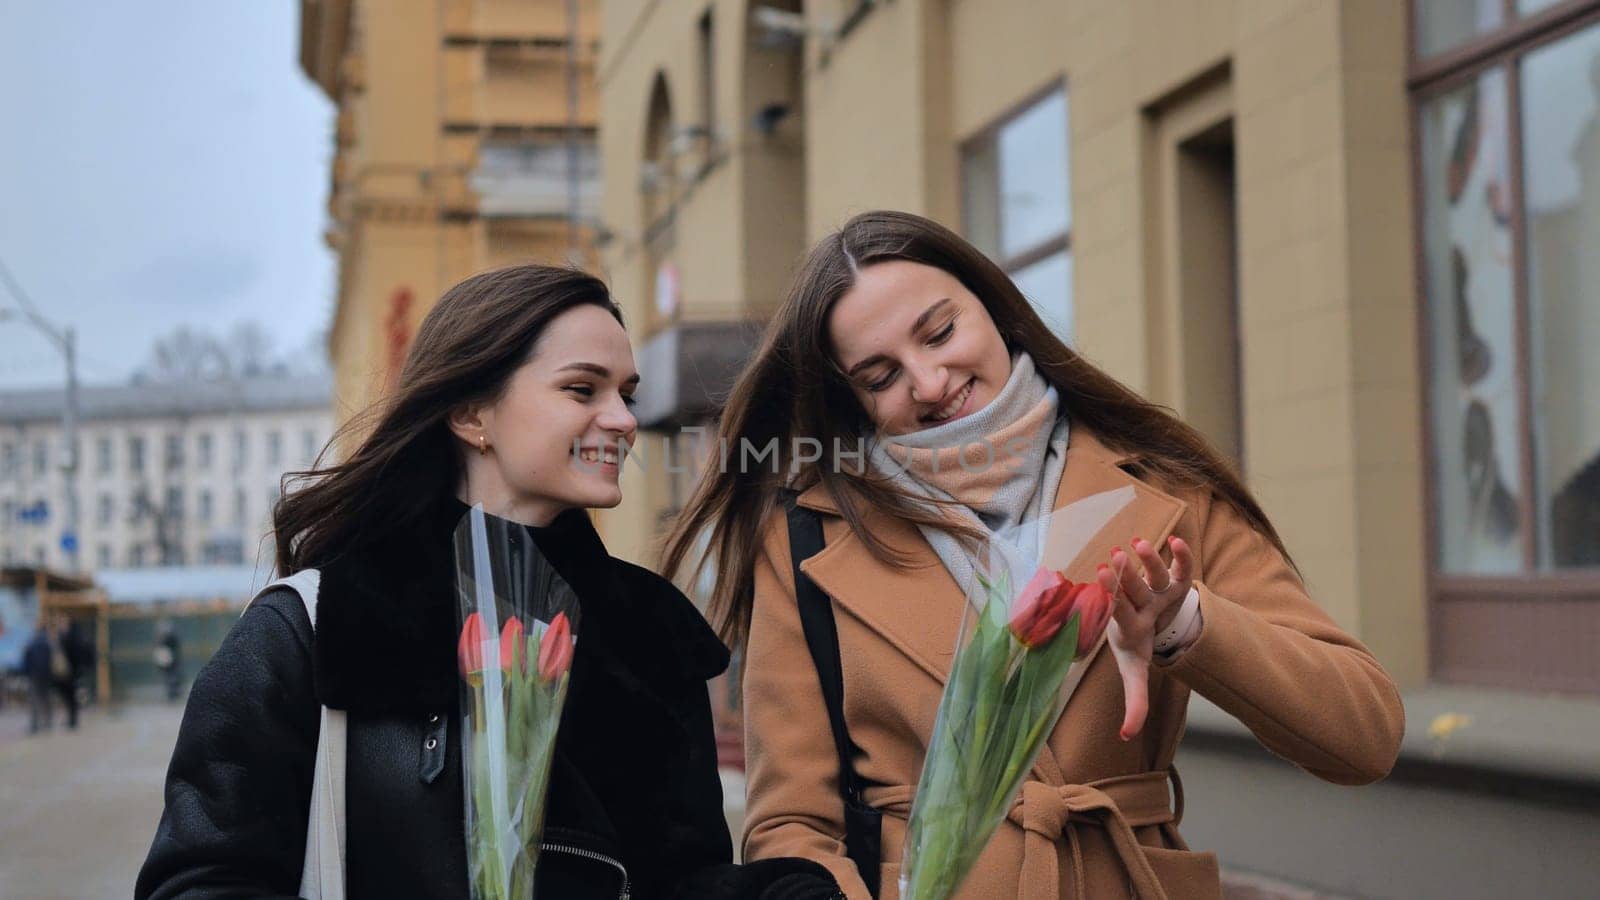 Two young girls, friends with flowers in their hands, walk along a city street on a cloudy spring day.